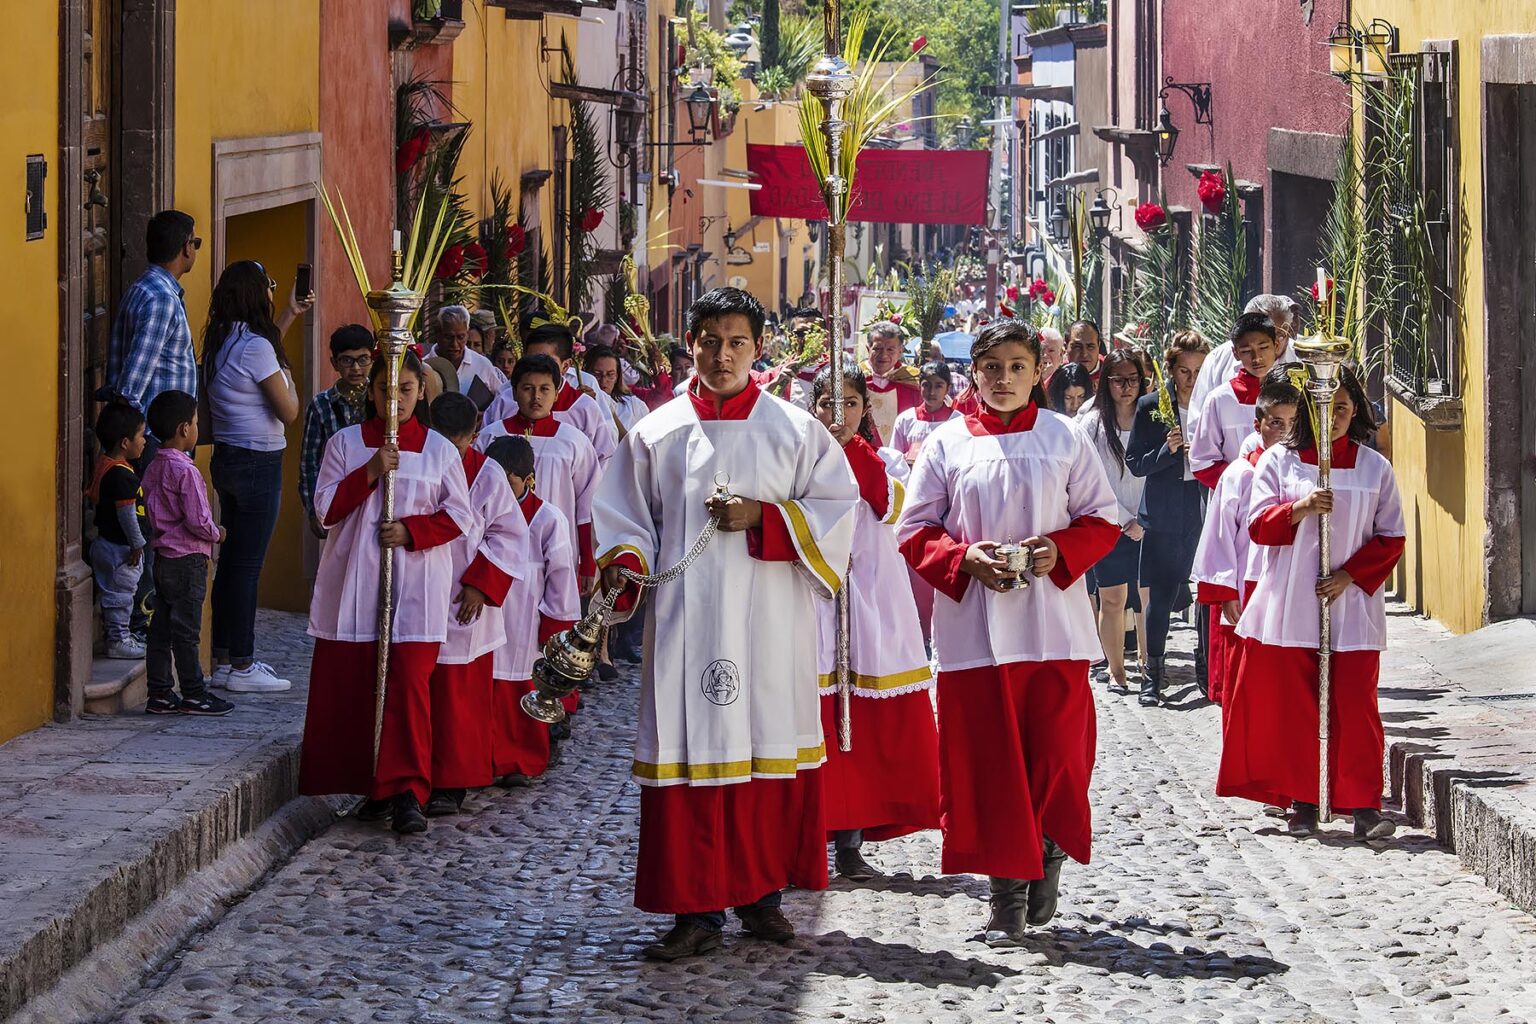 An CATHOLIC ACOLYTE burns copal to lead the PALM SUNDAY procession from Parque Juarez to the Jardin - SAN MIGUEL DE ALLENDE, MEXICO